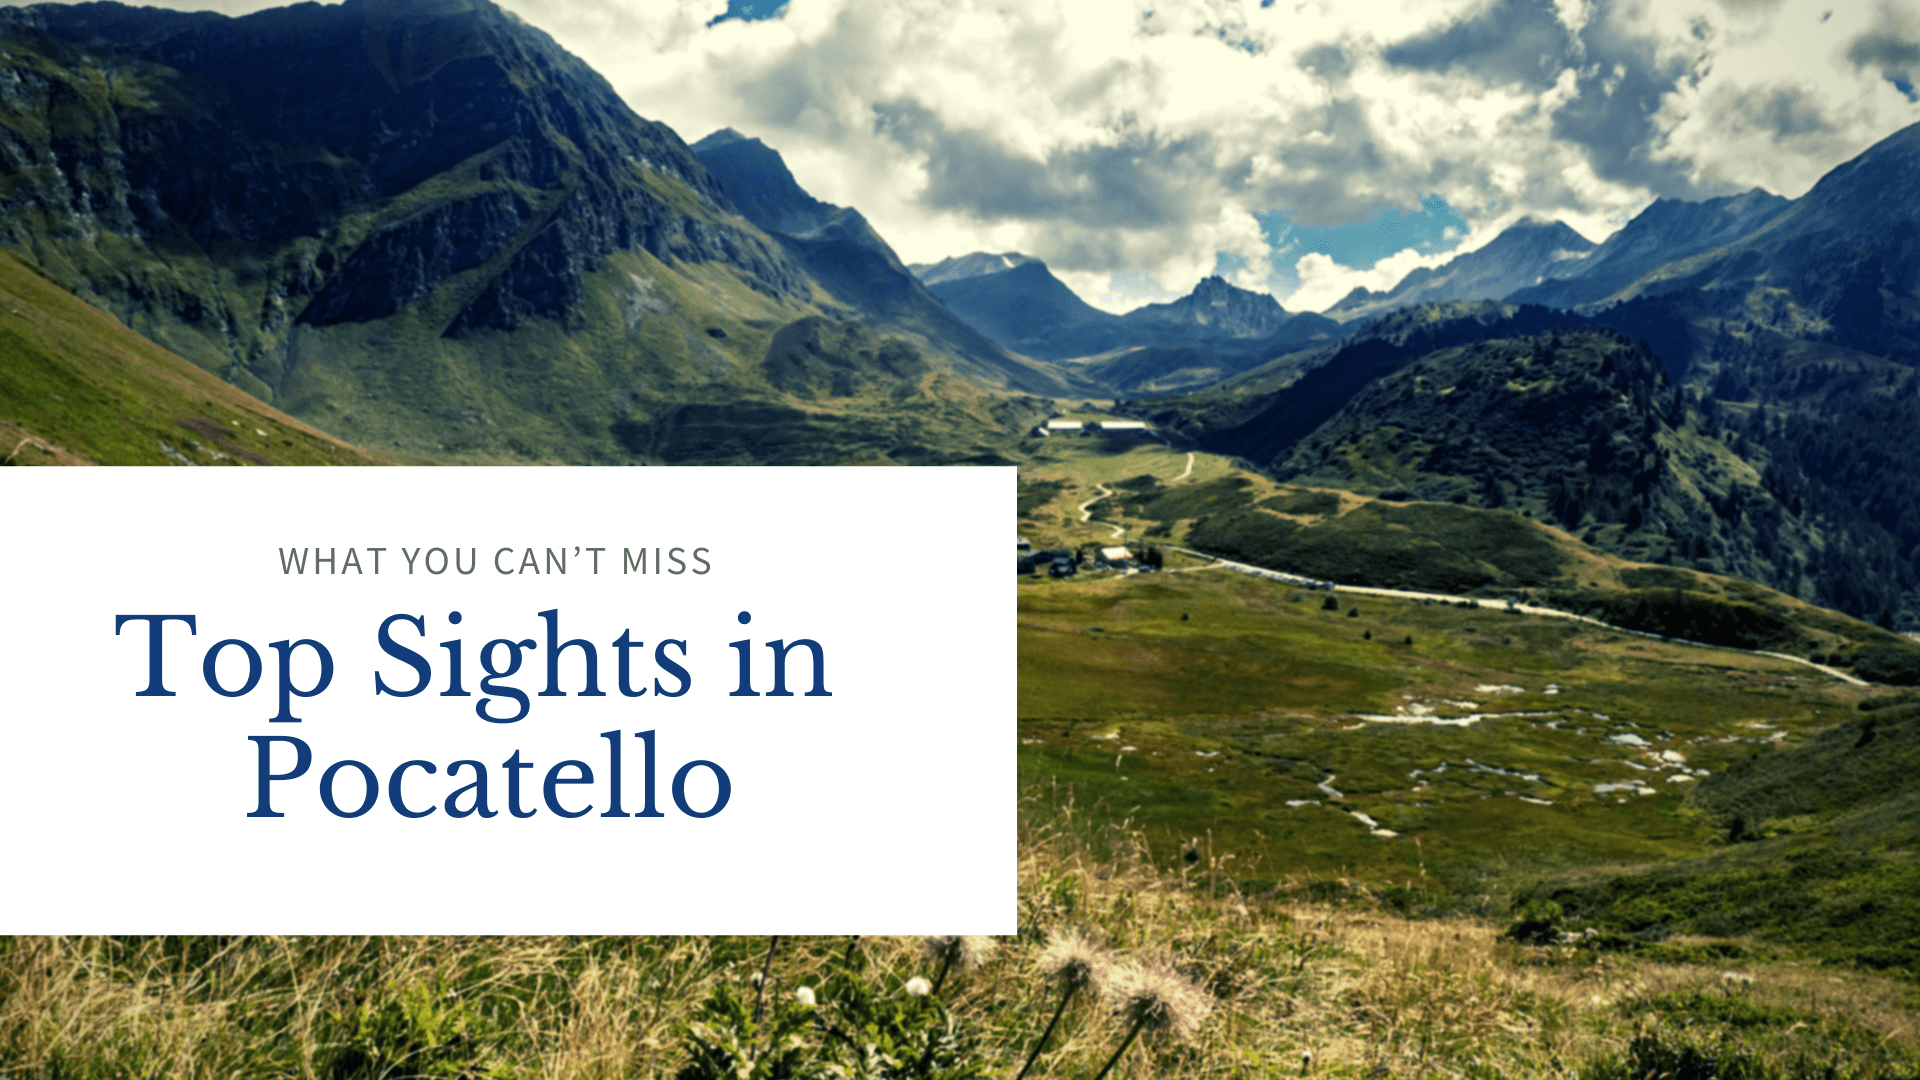 Top Sights in Pocatello – What You Can’t Miss